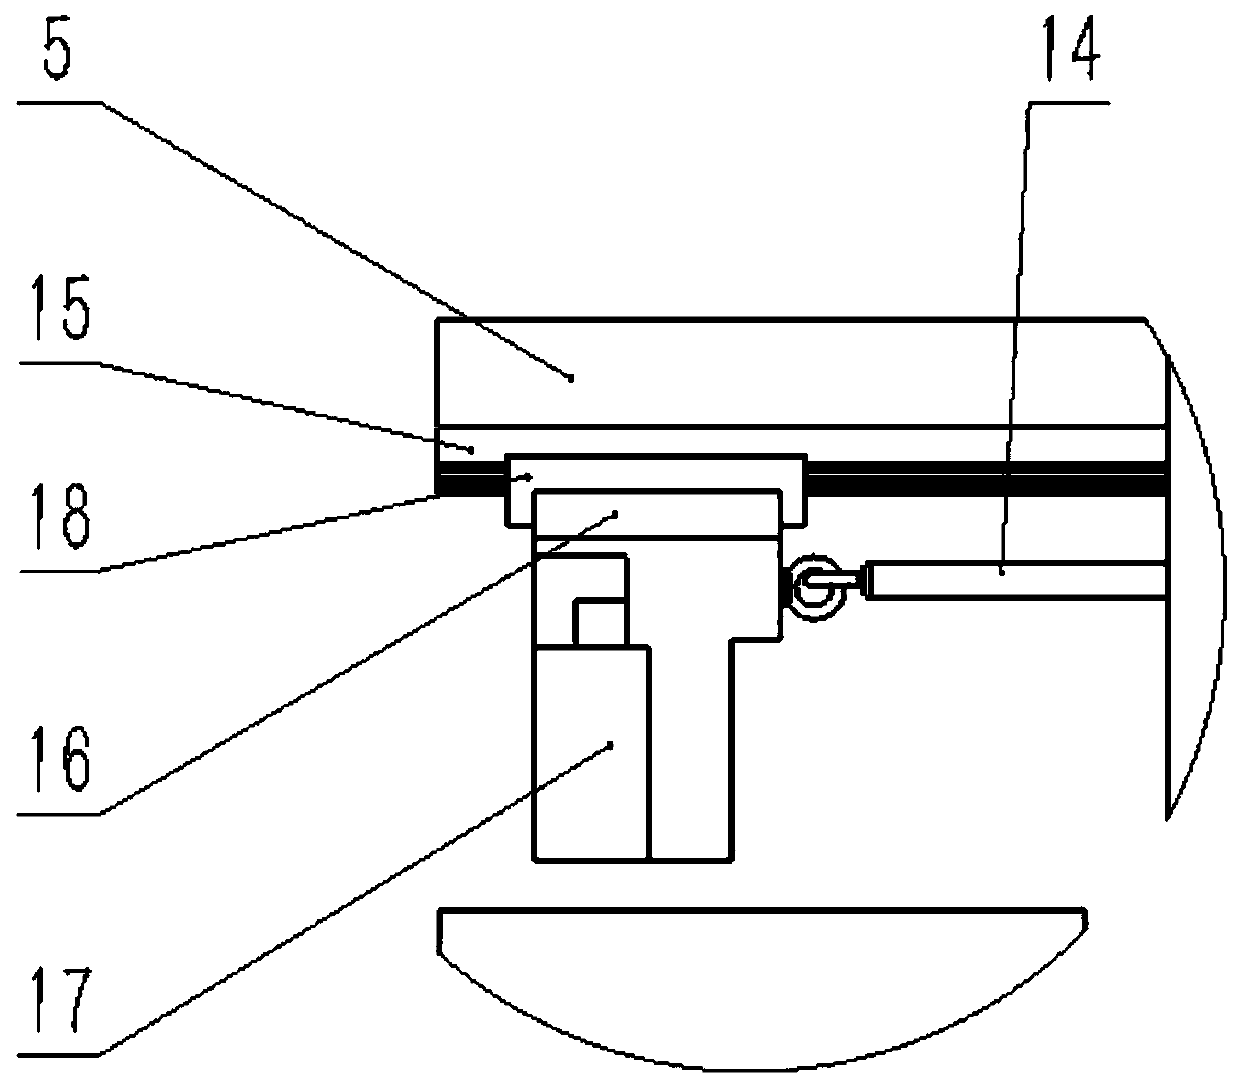 Vehicle brake pad surface total run-out detection device